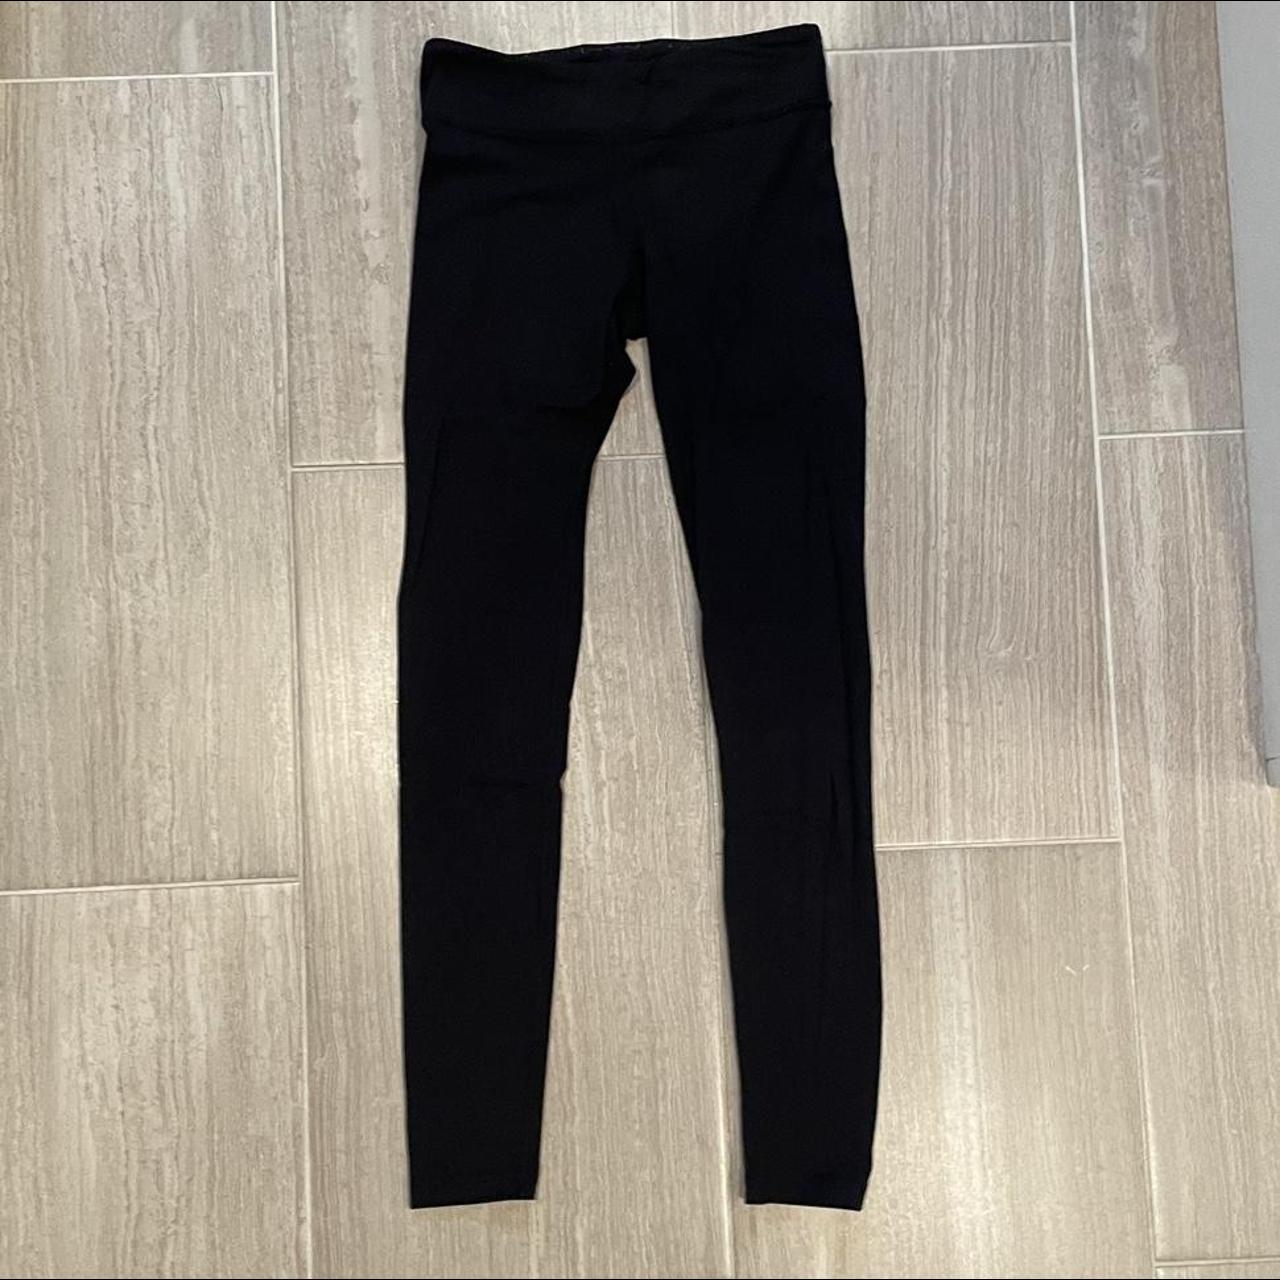 90 degree by reflex Leggings size large black and - Depop